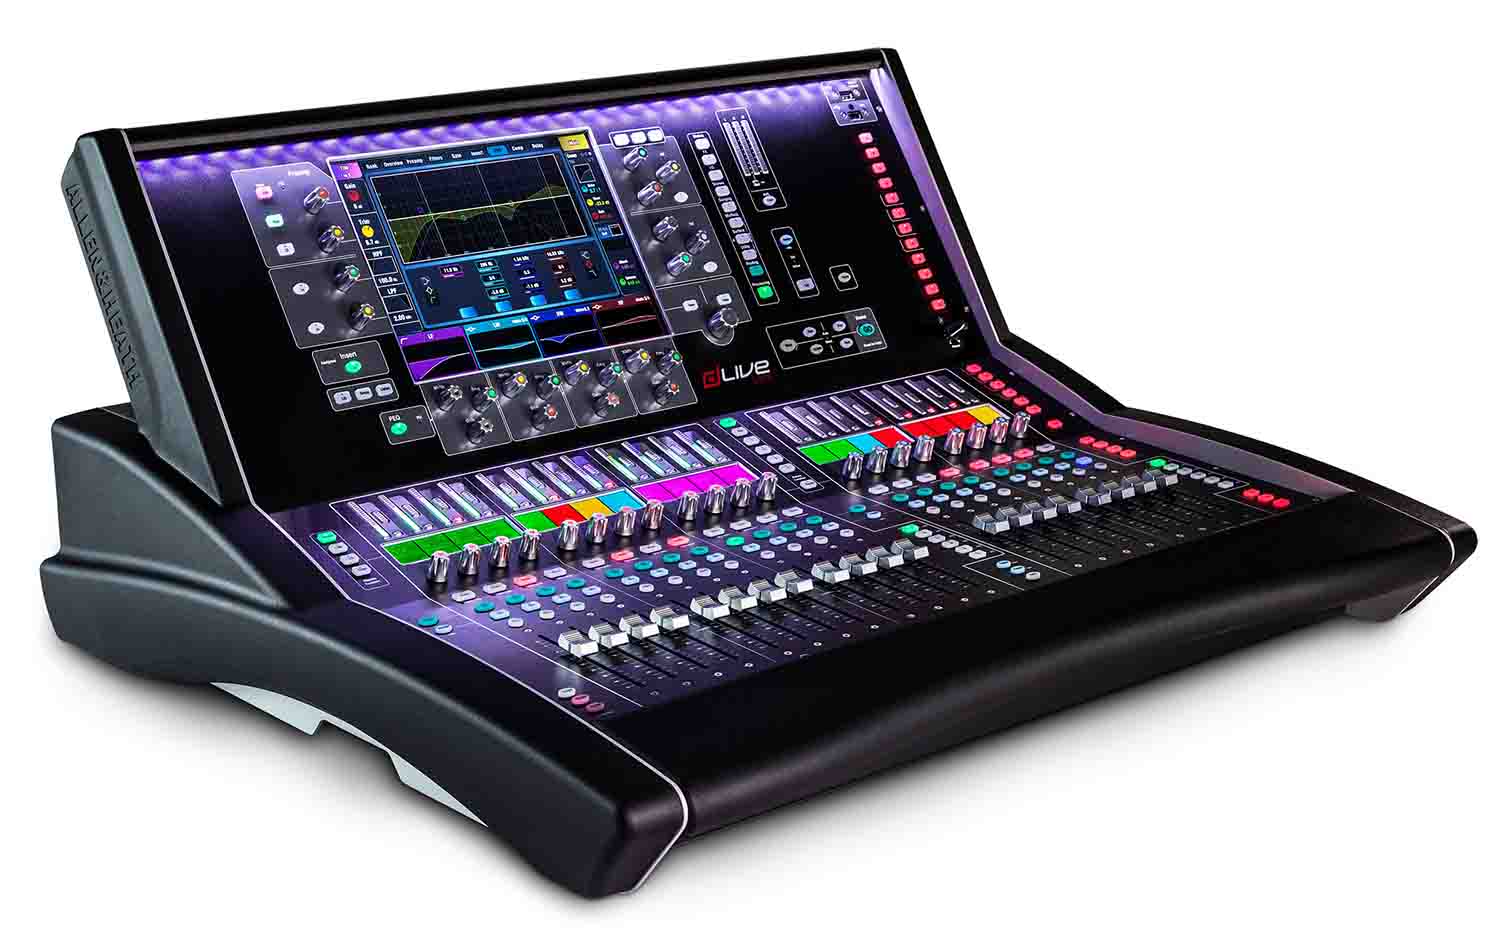 Allen & Heath dLive S3000 20 Fader Control Surface for MixRack - Hollywood DJ